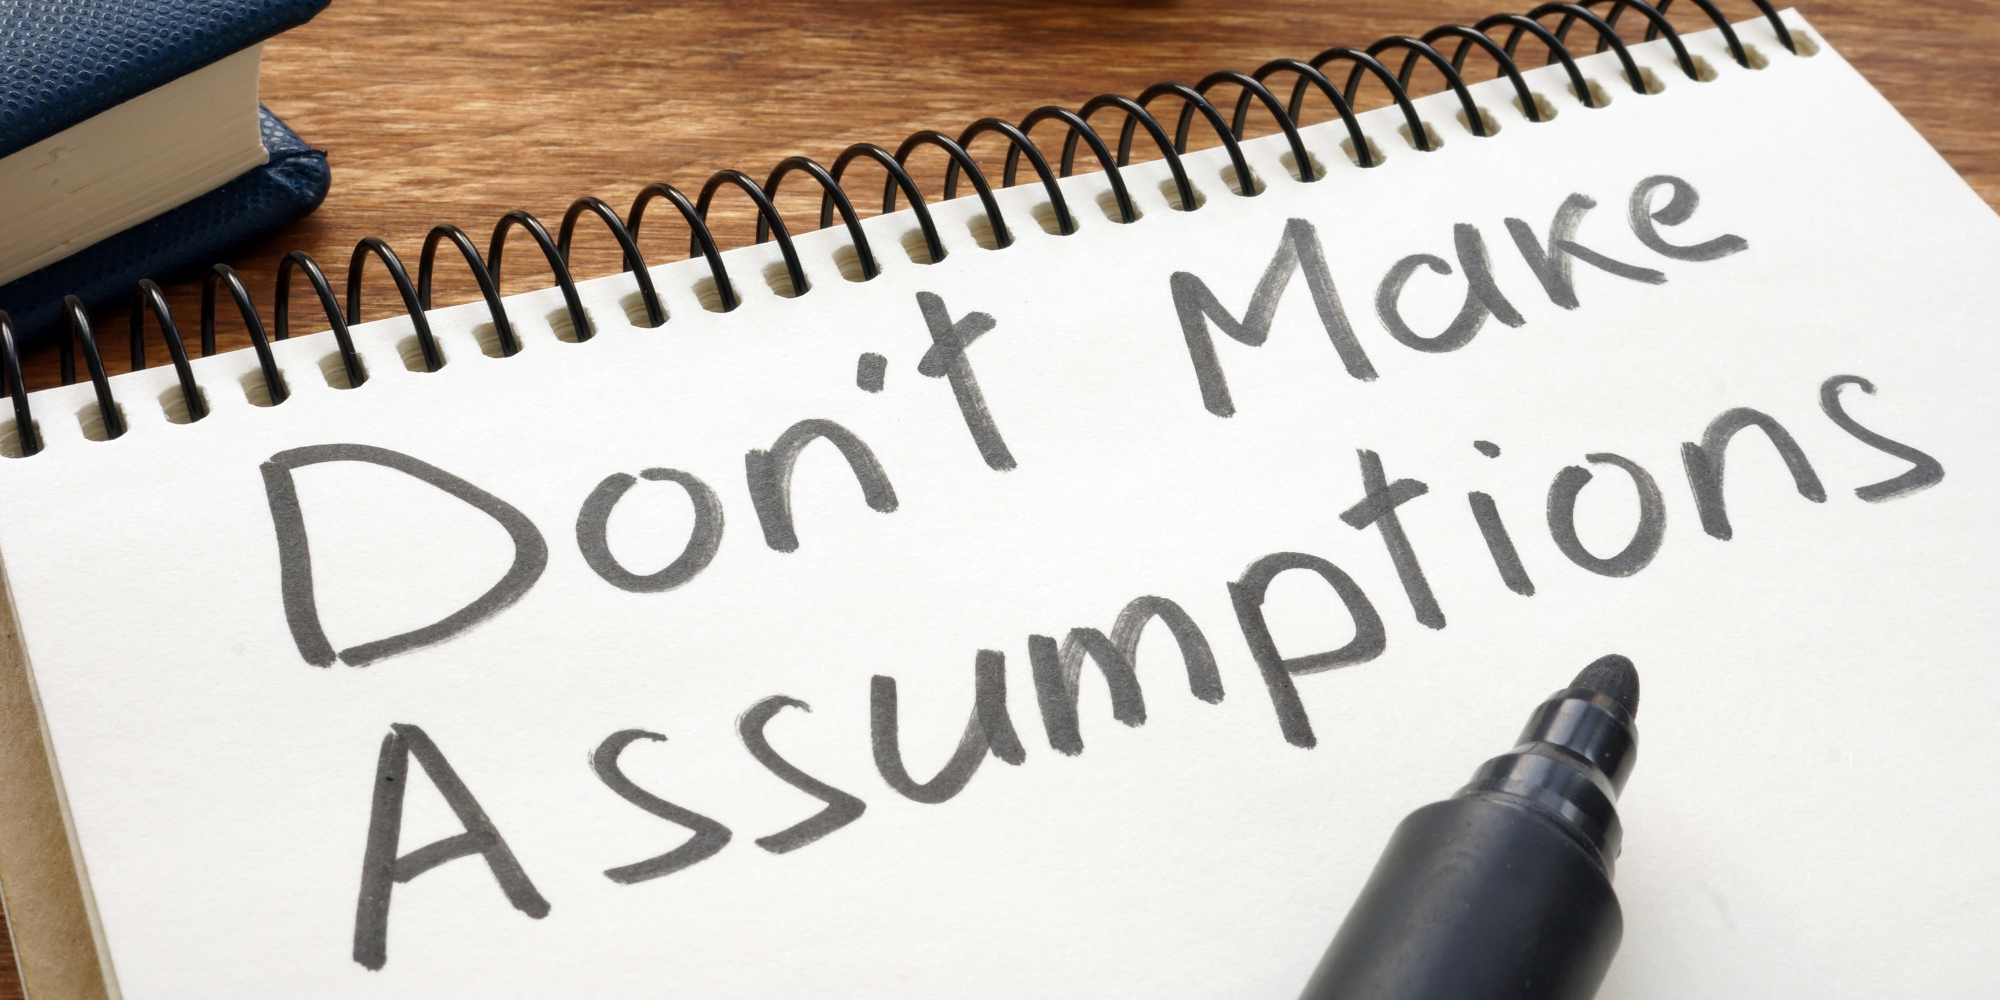 Notepad with "Don't Make Assumptions" written on it